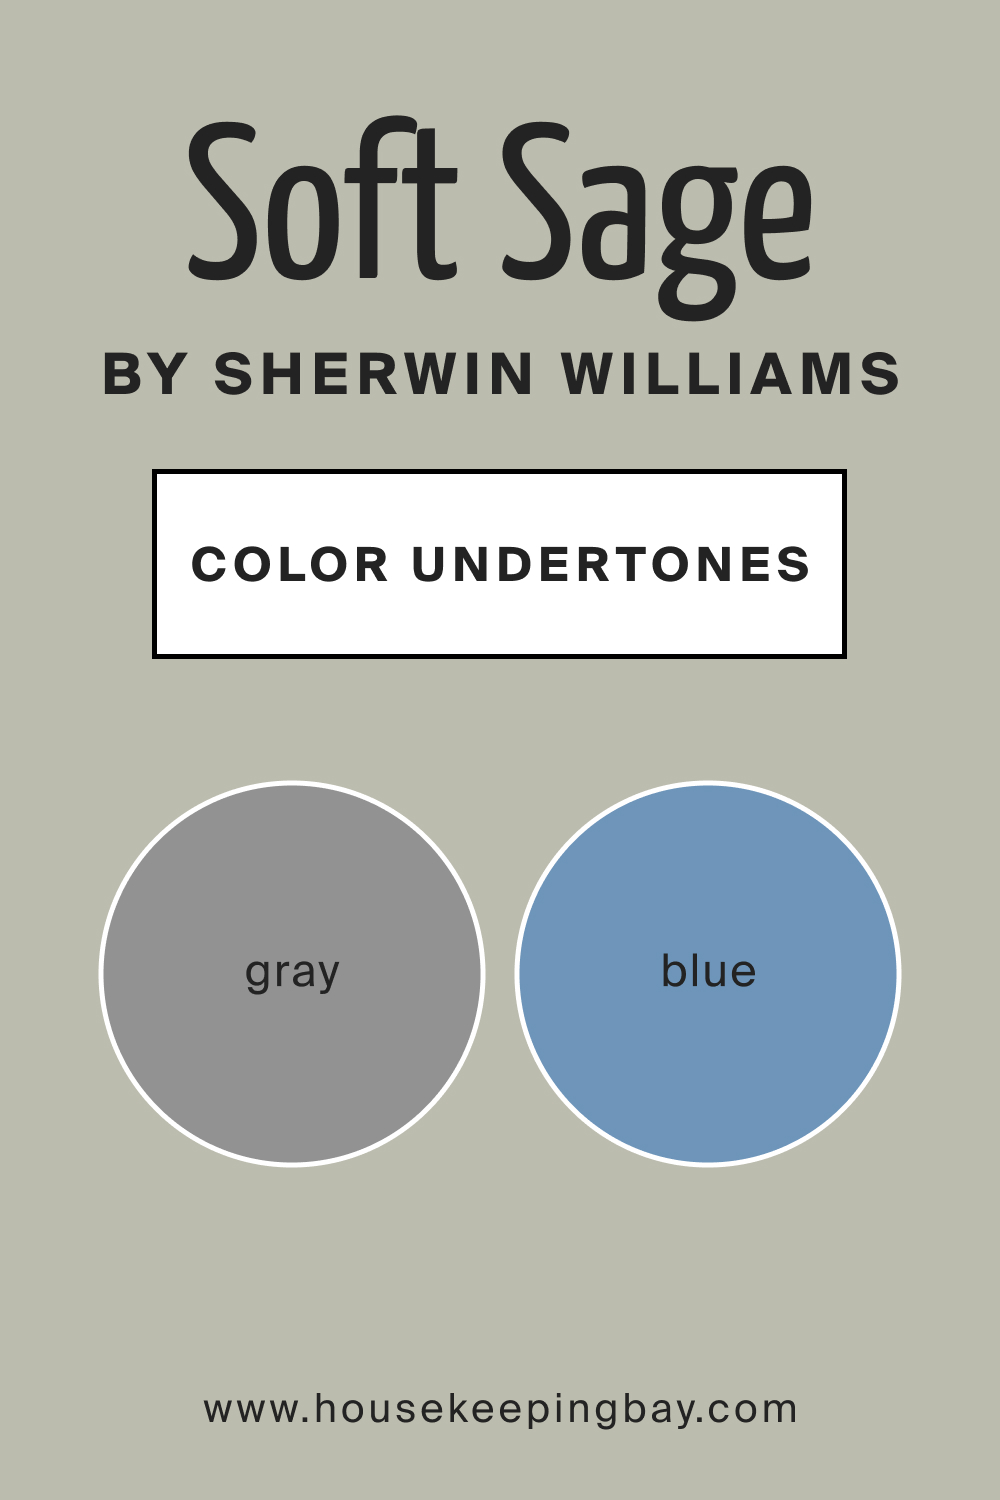 SW 9647 Soft Sage by Sherwin Williams Color Undertone